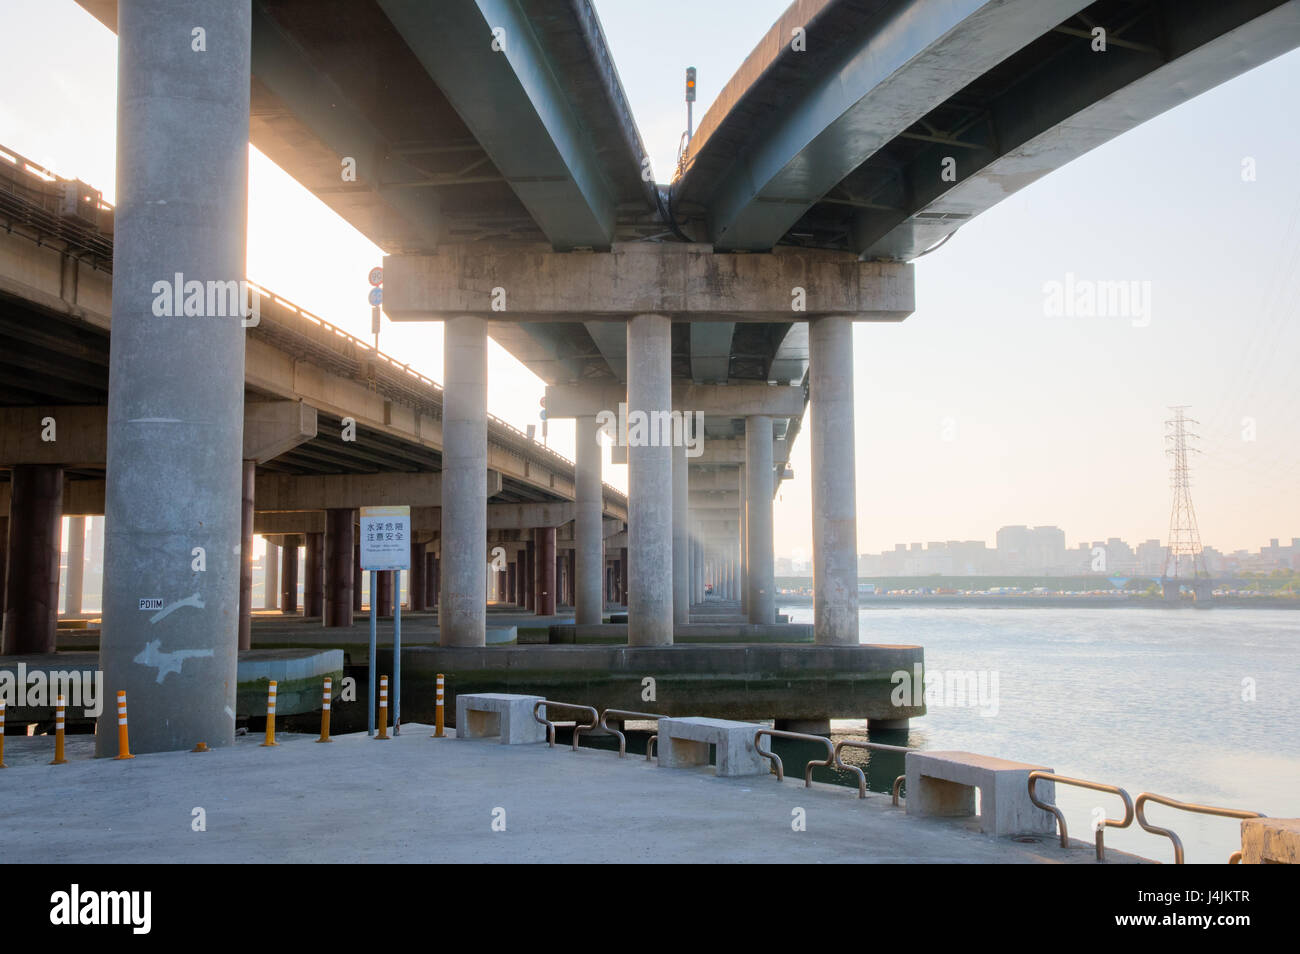 NEW TAPEI CITY, TAIWAN: Urban view under the Sun Yat-sen Freeway 1 over the Tamsui River. Sunbeams shine along the concrete pillars under the road. Stock Photo